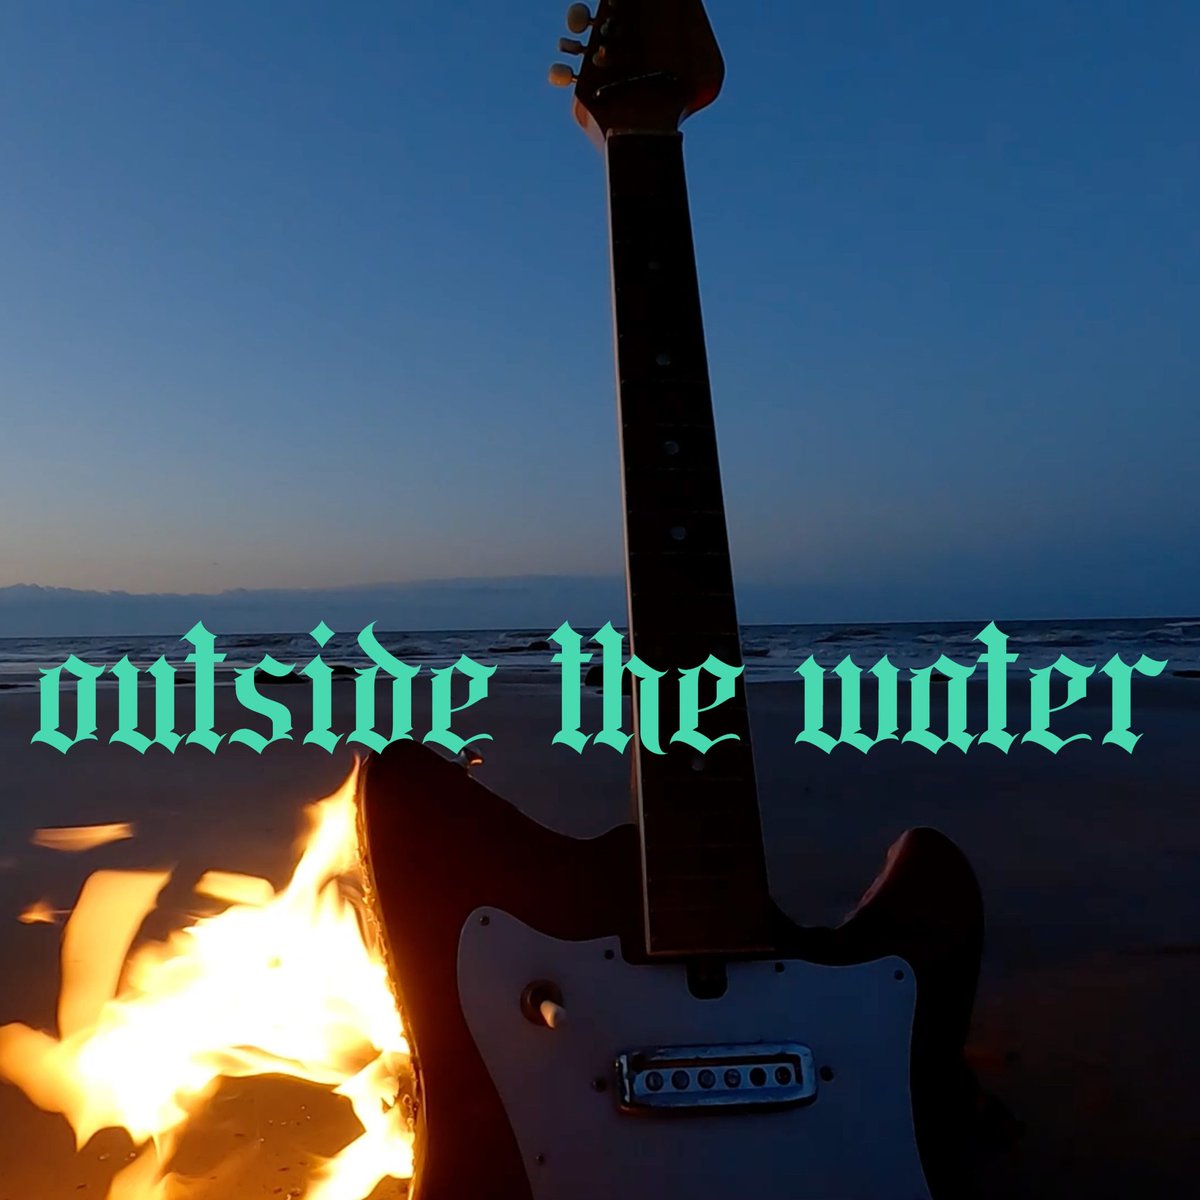 Listen to the single 'Outside The Water' and discover the creativity of the wonderful and promising Alfie Connor. #indiedockmusicblog #indipop indiedockmusicblog.co.uk/?p=23550